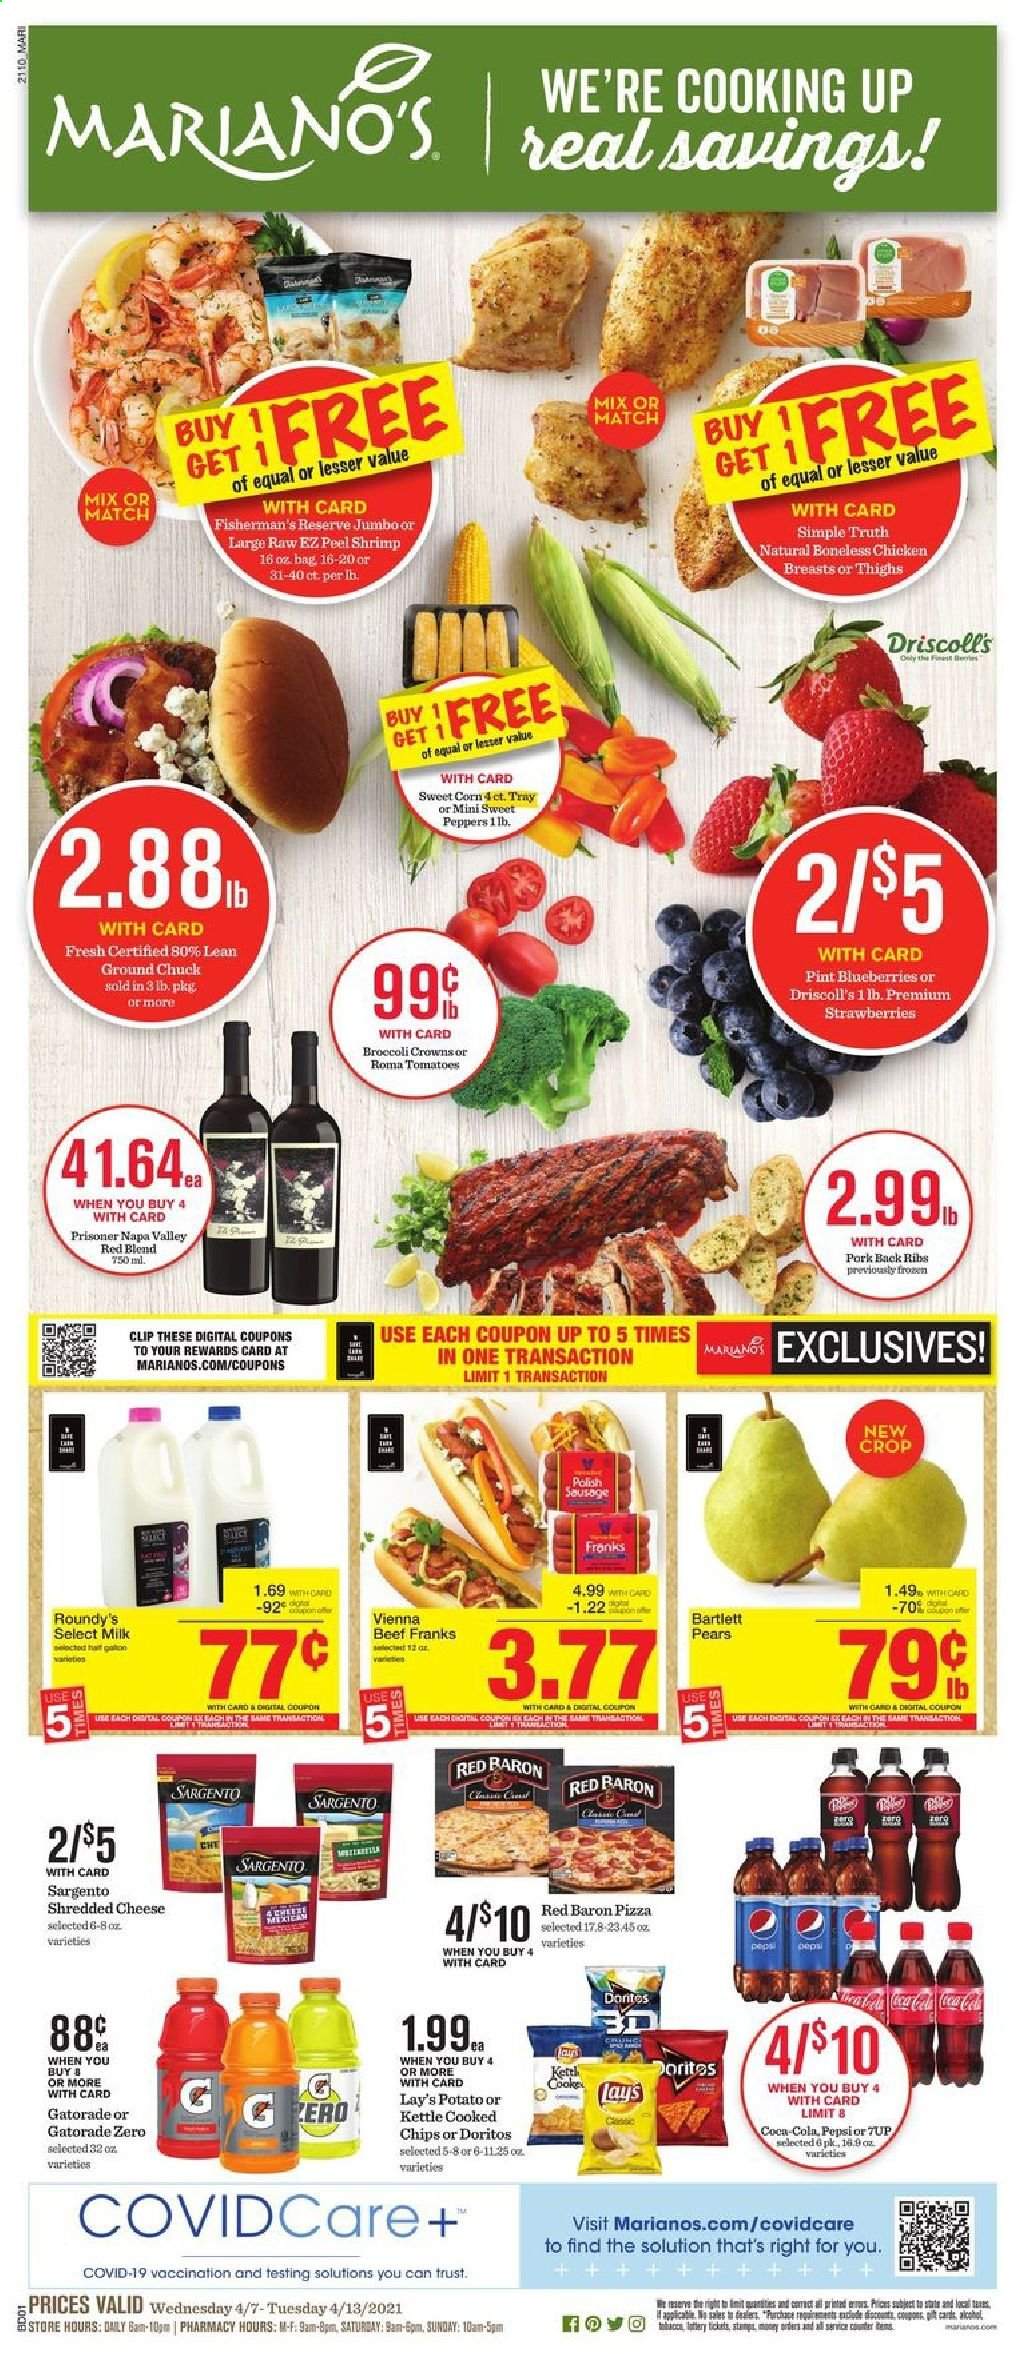 thumbnail - Mariano’s Flyer - 04/07/2021 - 04/13/2021 - Sales products - Bartlett pears, corn, tomatoes, sweet corn, blueberries, strawberries, pears, shrimps, pizza, sausage, polish sausage, shredded cheese, Sargento, milk, Red Baron, Doritos, chips, Lay’s, Coca-Cola, Pepsi, 7UP, Gatorade, alcohol, chicken breasts, ground chuck, pork meat, pork ribs, pork back ribs, tray, peppers. Page 1.